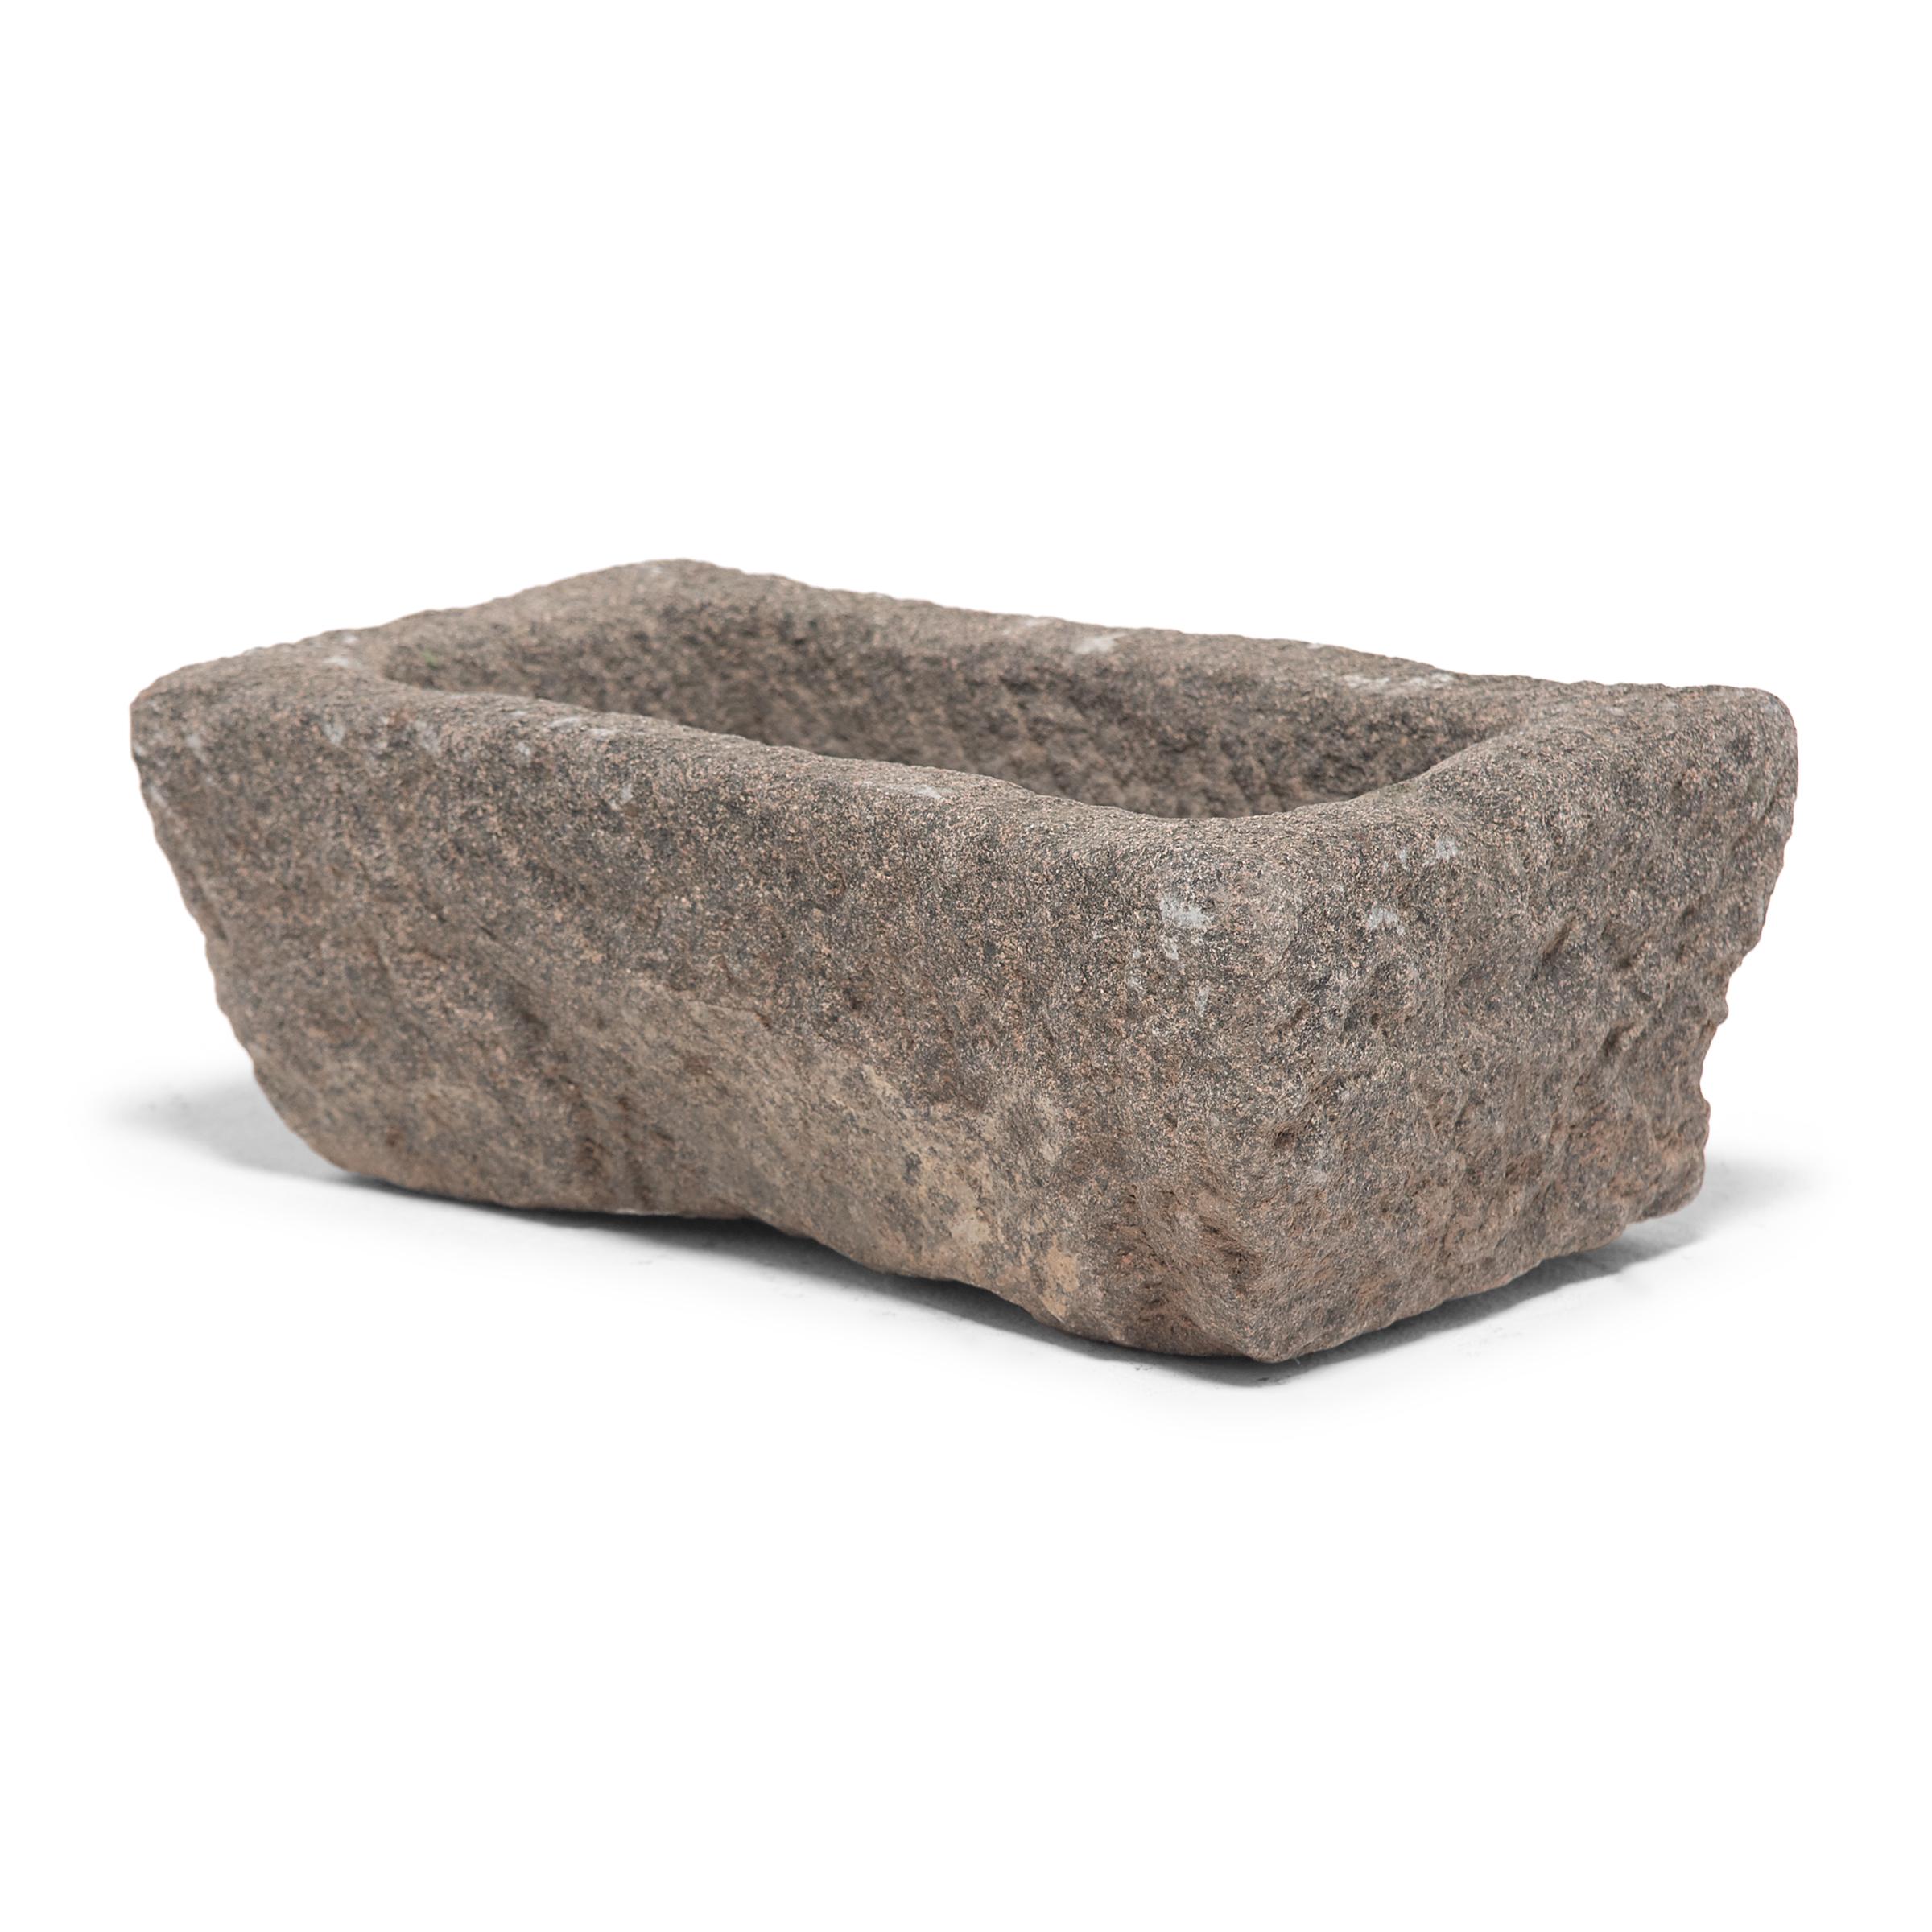 Once a common sight in courtyards throughout rural China, this textured stone vessel was used as a grain trough for chickens and other barnyard fowl. Chiseled from a block of granite over a century ago, the sculptural trough charms with its uneven